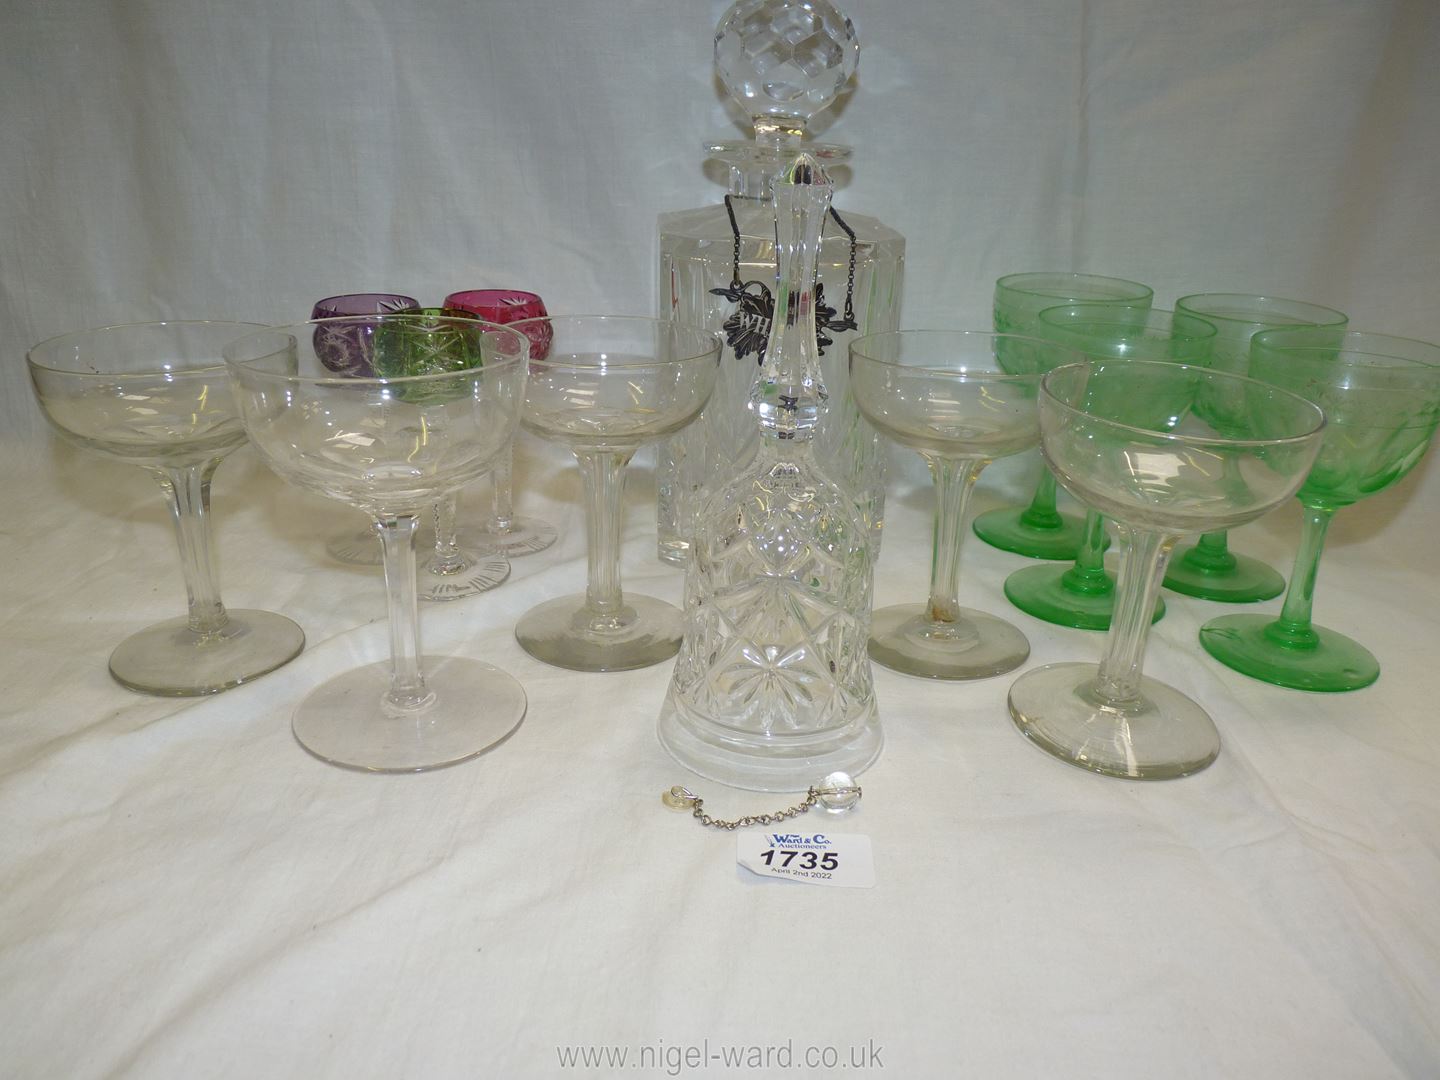 Five champagne glasses, green wine glasses, bell, decanter with stopper etc. - Image 2 of 3